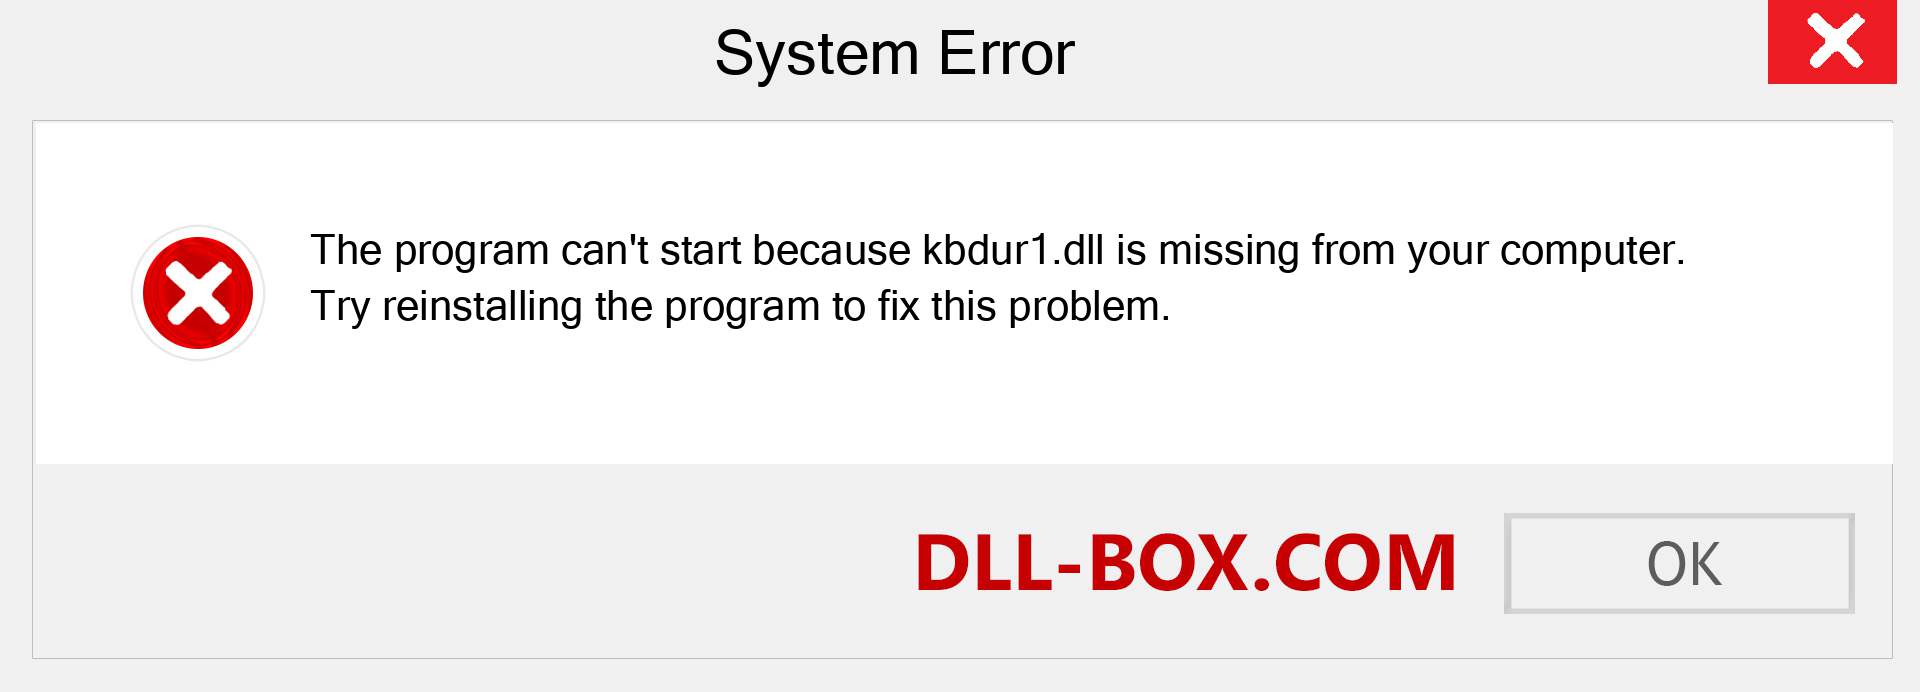  kbdur1.dll file is missing?. Download for Windows 7, 8, 10 - Fix  kbdur1 dll Missing Error on Windows, photos, images